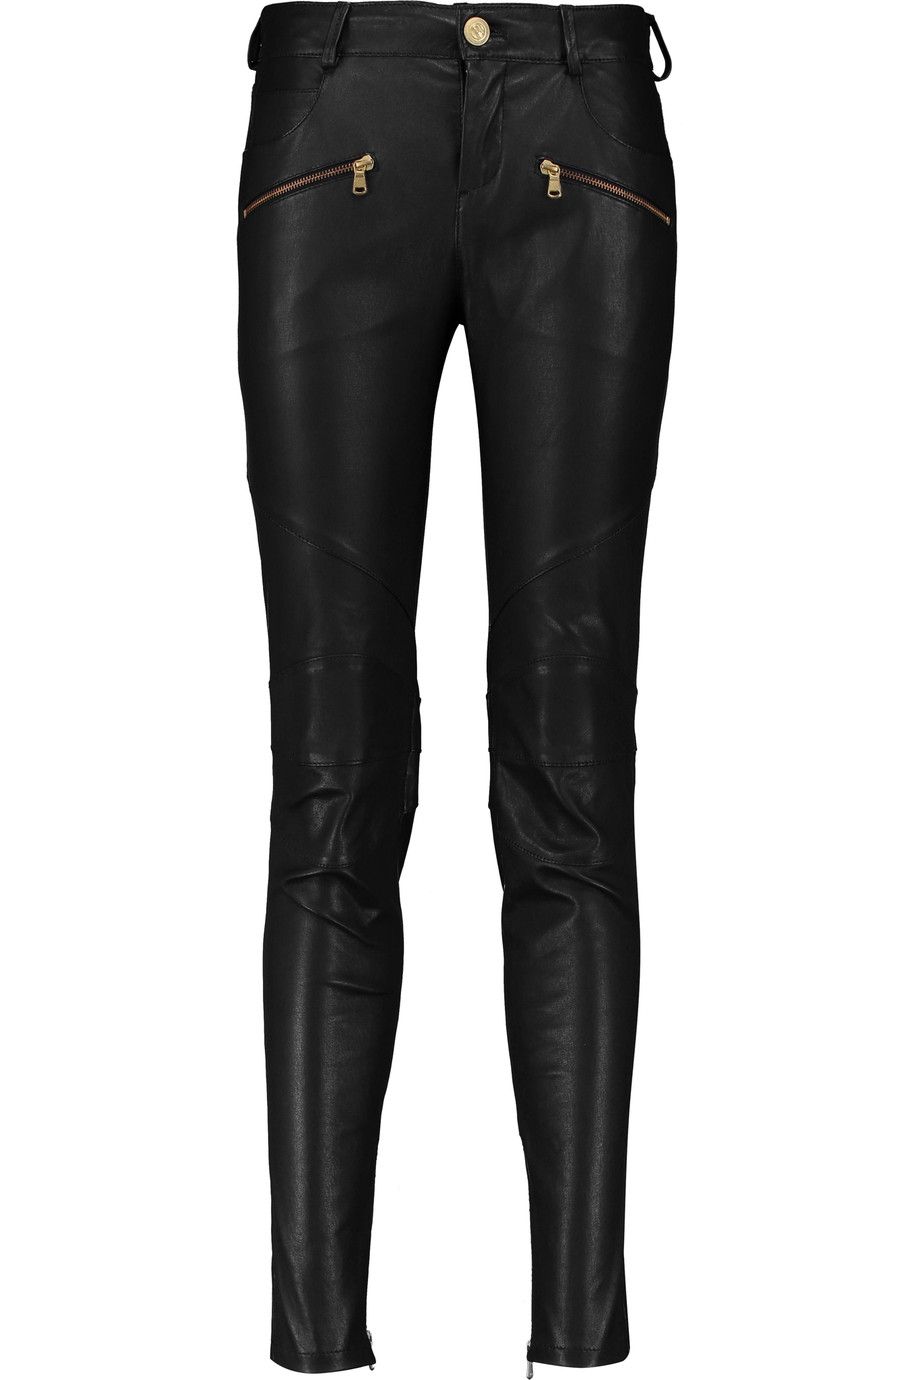 leather skinny jeans